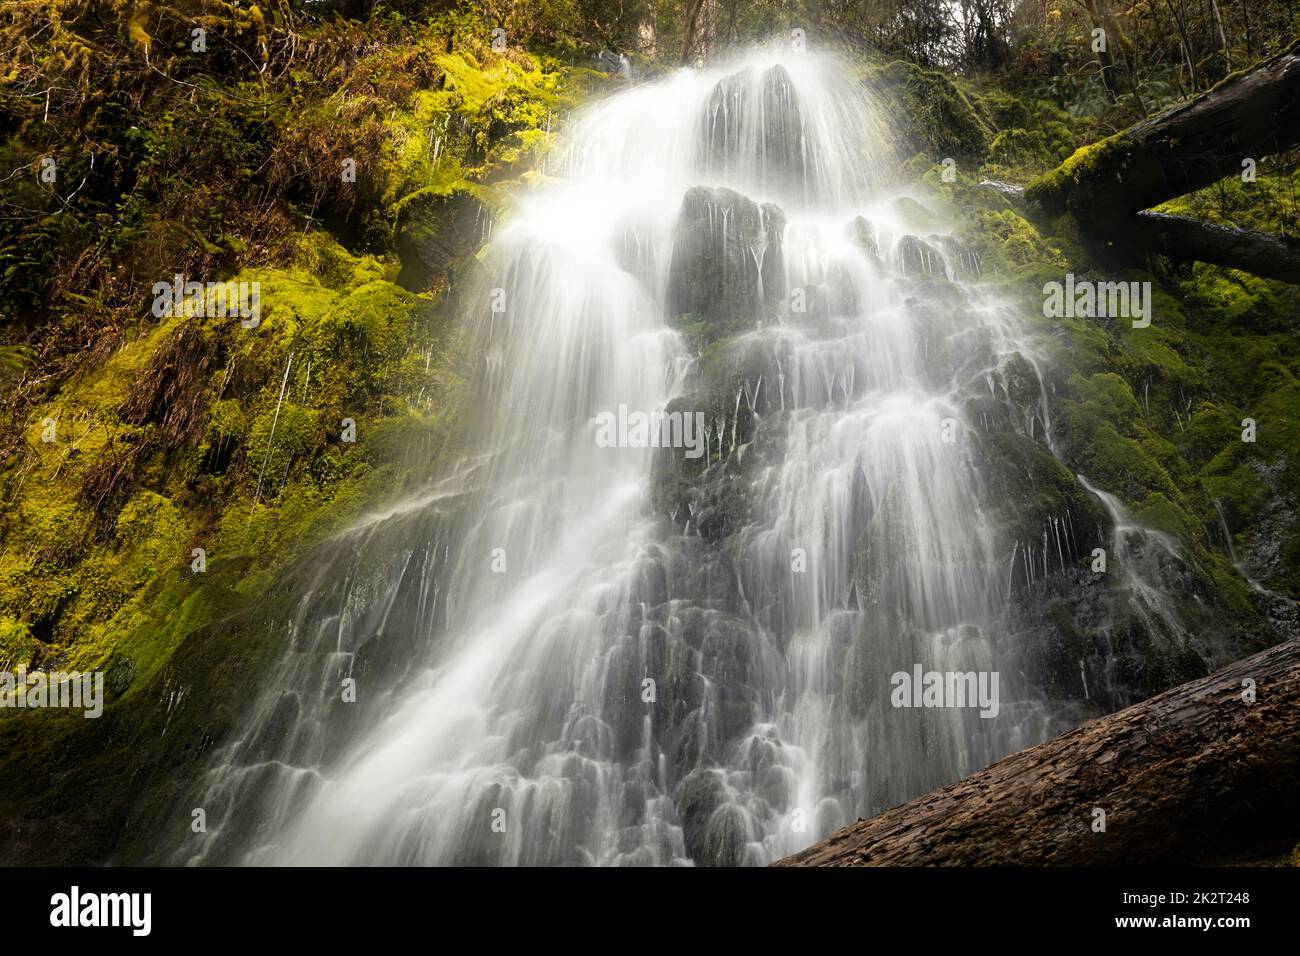 WA22041-00...WASHINGTON - Mineral Creek Falls in the Hoh Rain Forest of Olympic National Park. Stock Photo